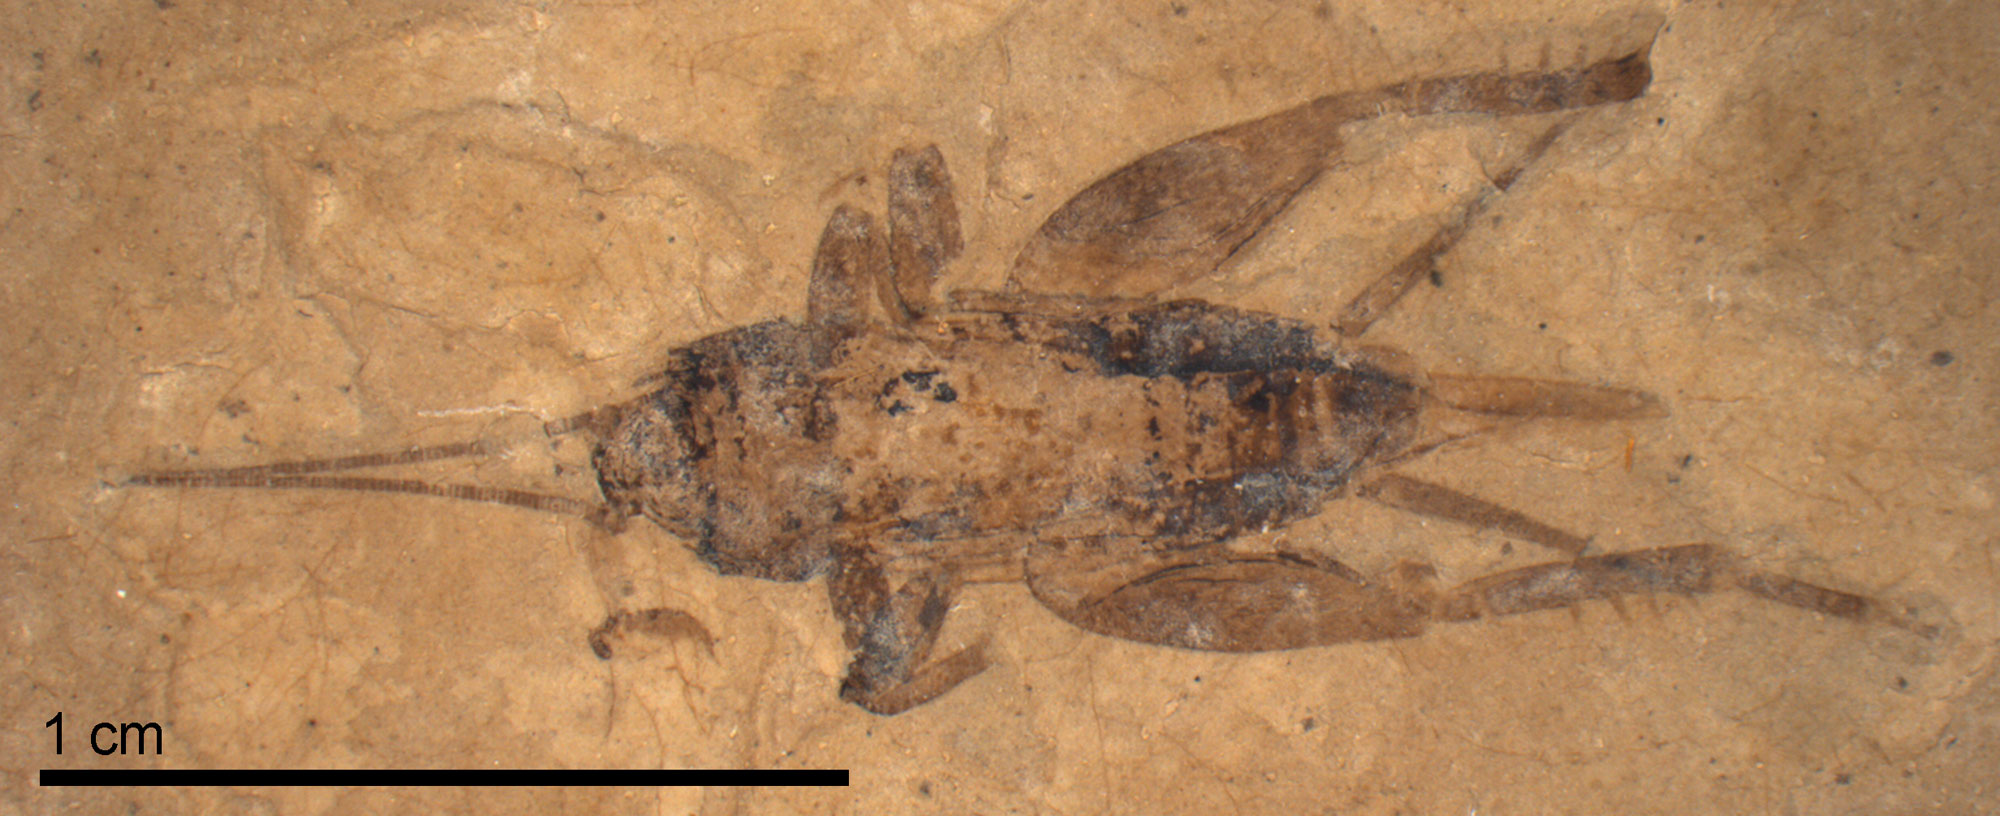 Photograph of a fossil cricket from the Eocene Green River Formation of Colorado. The fossils shows the characteristic long rear legs with short spines sticking out from their sides.